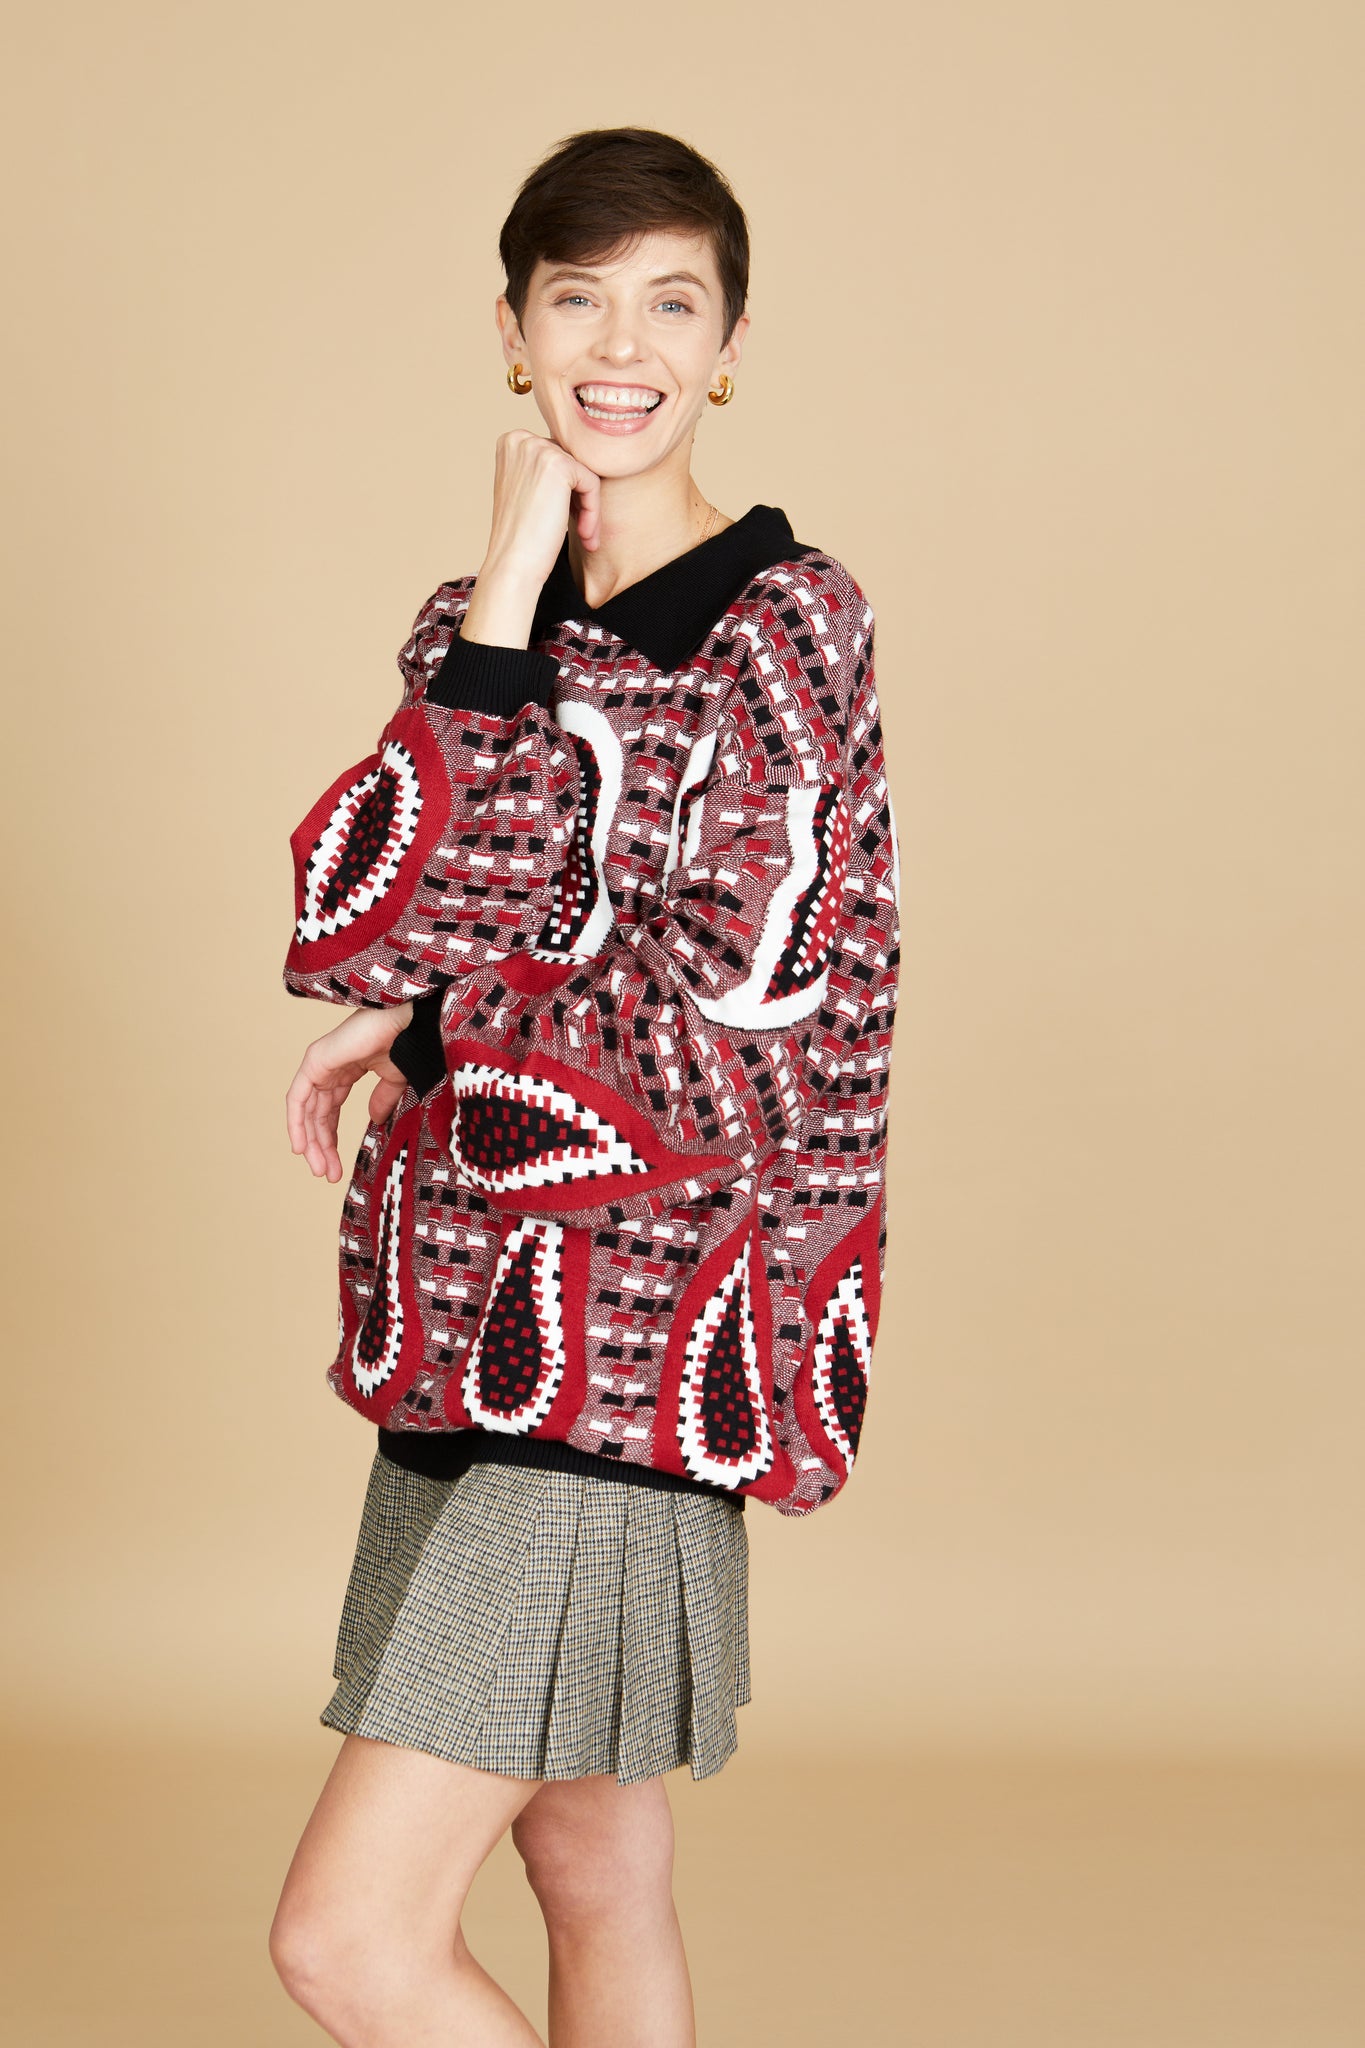 OVERSIZED SWEATER, PAISLEY MOTIF SWEATER, COLLAR ATTACHED, BURGUNDY BLACK WHITE MIXED COLOR, BALLON SLEEVES